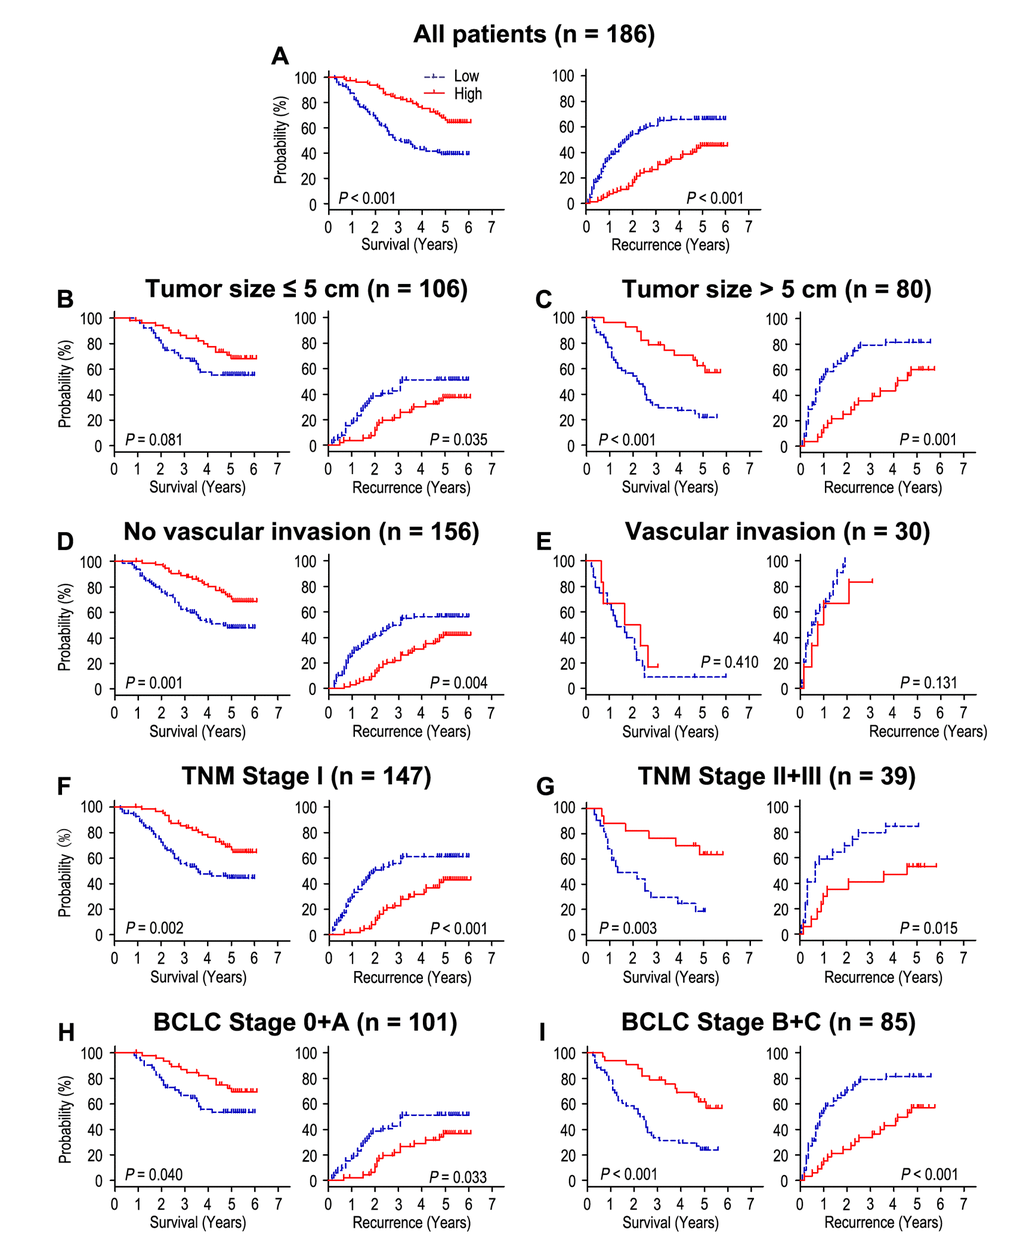 The effect of CLCA4 expression on overall survival and time to recurrence is shown for patients with HCC. All patients were classified according to tumor size, vascular invasion, TNM stage and BCLC stage. Kaplan-Meier survival estimates and log-rank tests were used to analyze the prognostic value of CLCA4 expression in all patients (A) and each subgroup (B-I).